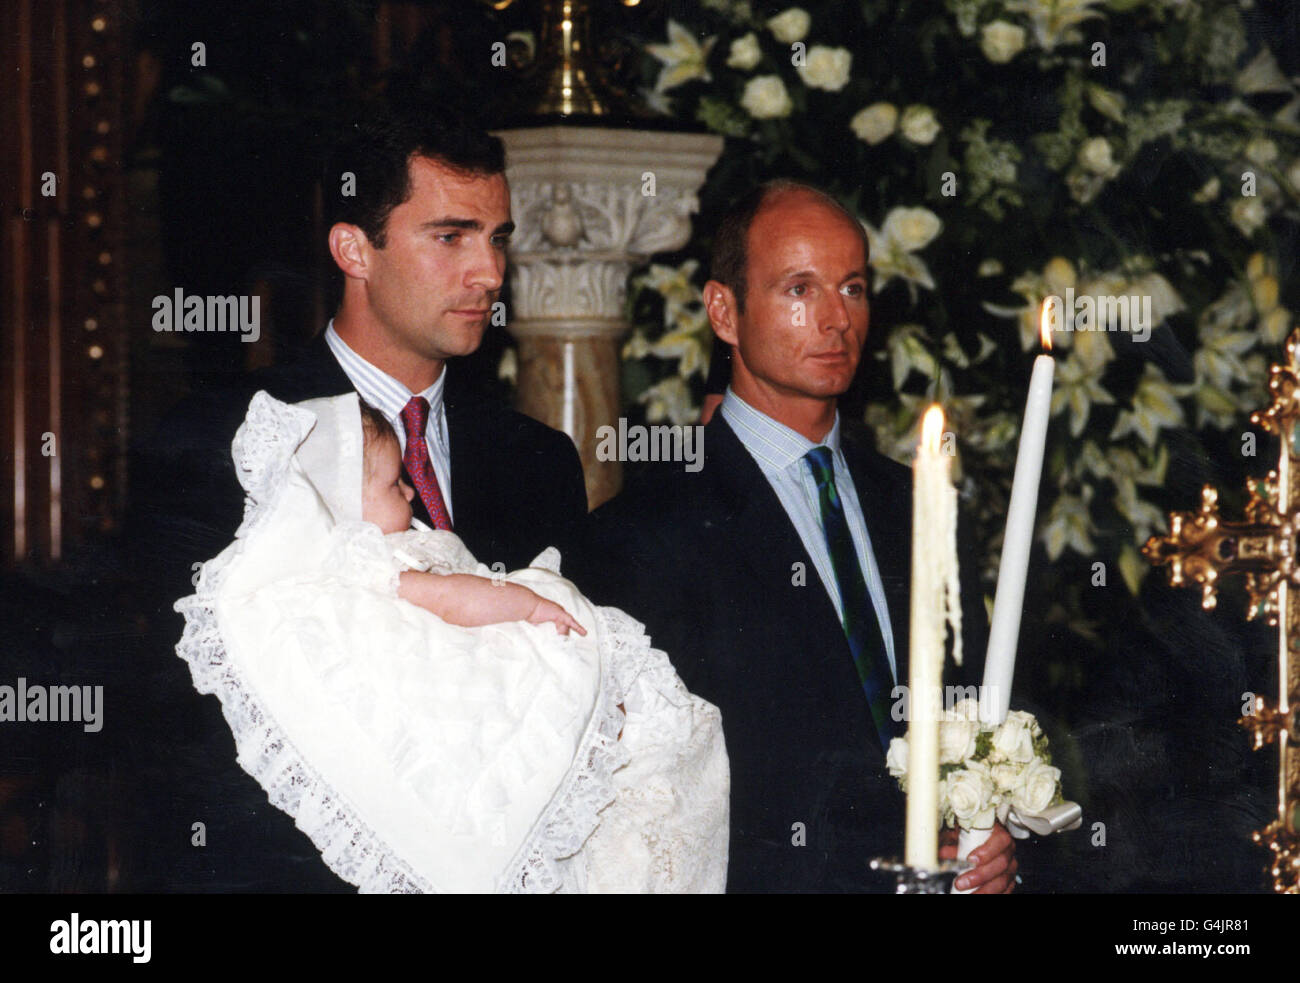 The christening of Prince Konstantine Alexios, son of Crown Prince and Princess Pavlos, at the Greek Cathedral in Central London. (L-R) The Prince of Asurias (Crown Prince Felipe of Spain) and Prince Dimitri of Yugoslavia. Stock Photo